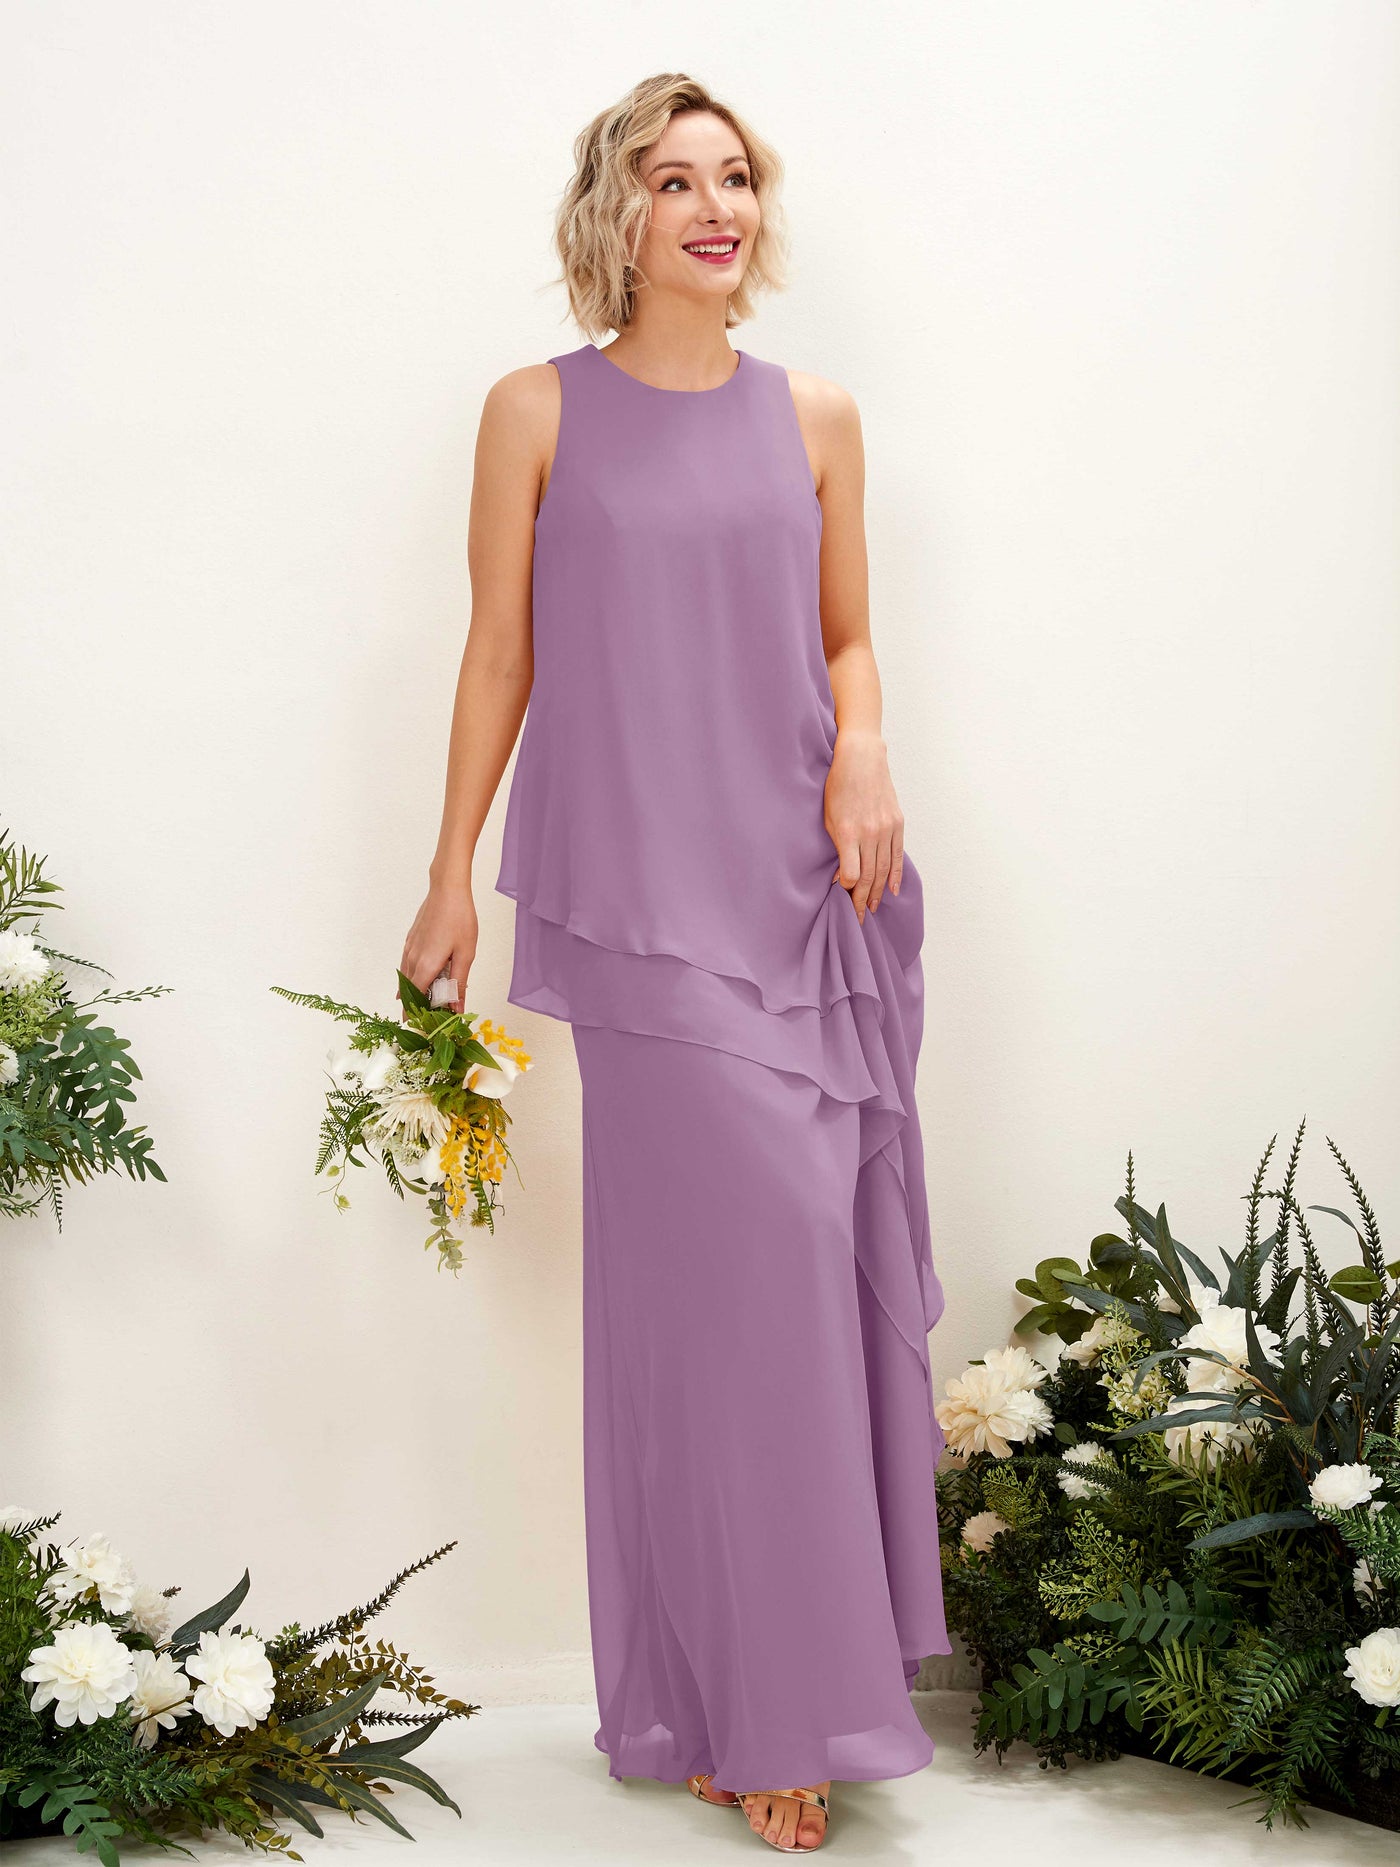 Orchid Mist Bridesmaid Dresses Bridesmaid Dress Maternity Chiffon Round Full Length Sleeveless Wedding Party Dress (81222321)#color_orchid-mist